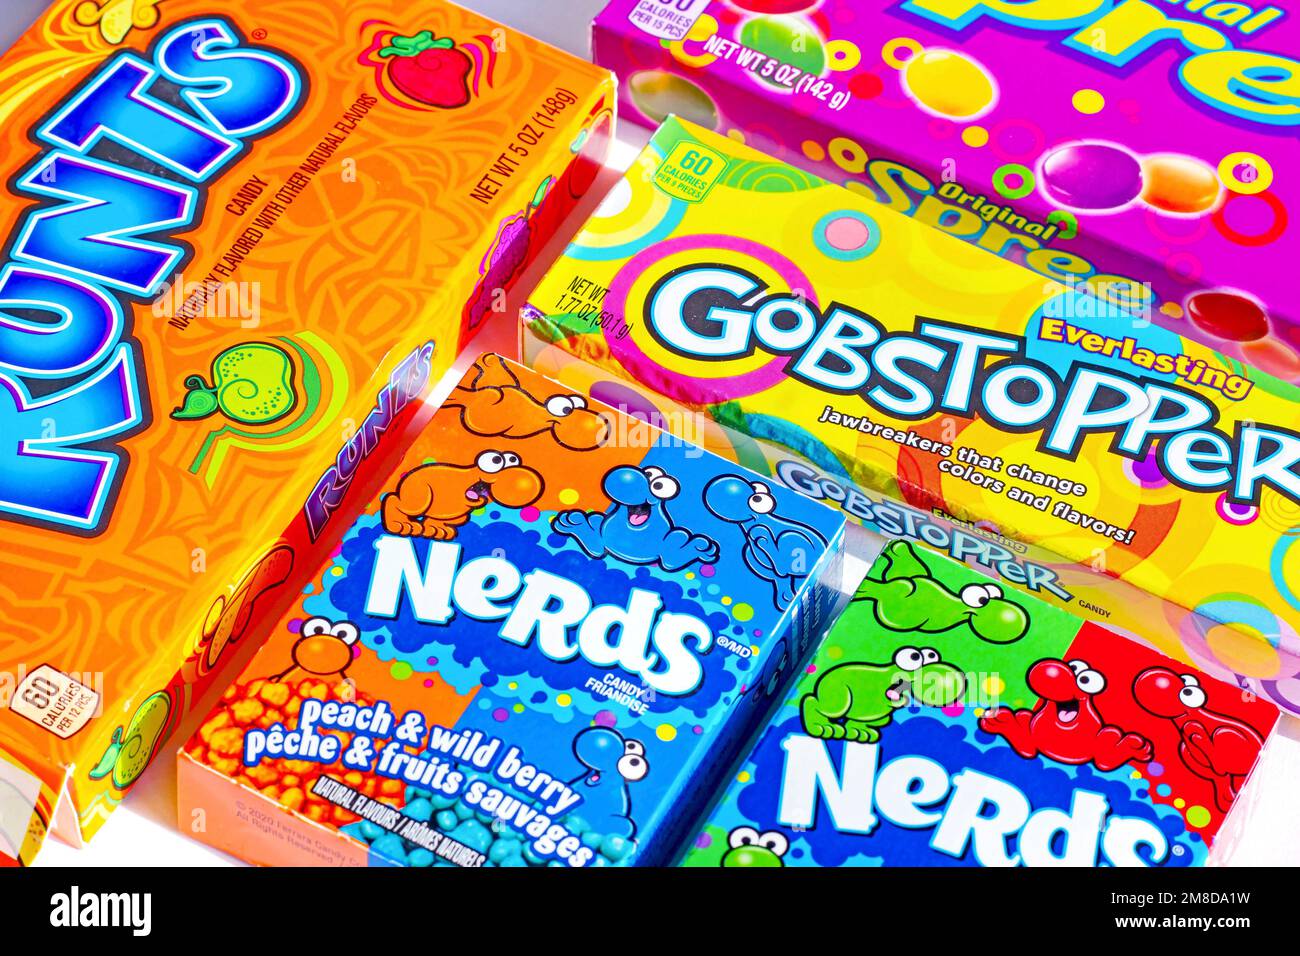 DUSHANBE, TAJIKISTAN - AUGUST 18, 2022: Different kinds of American sweet candies (Gobstopper, Spree, Runts, Nerds) packs. Stock Photo